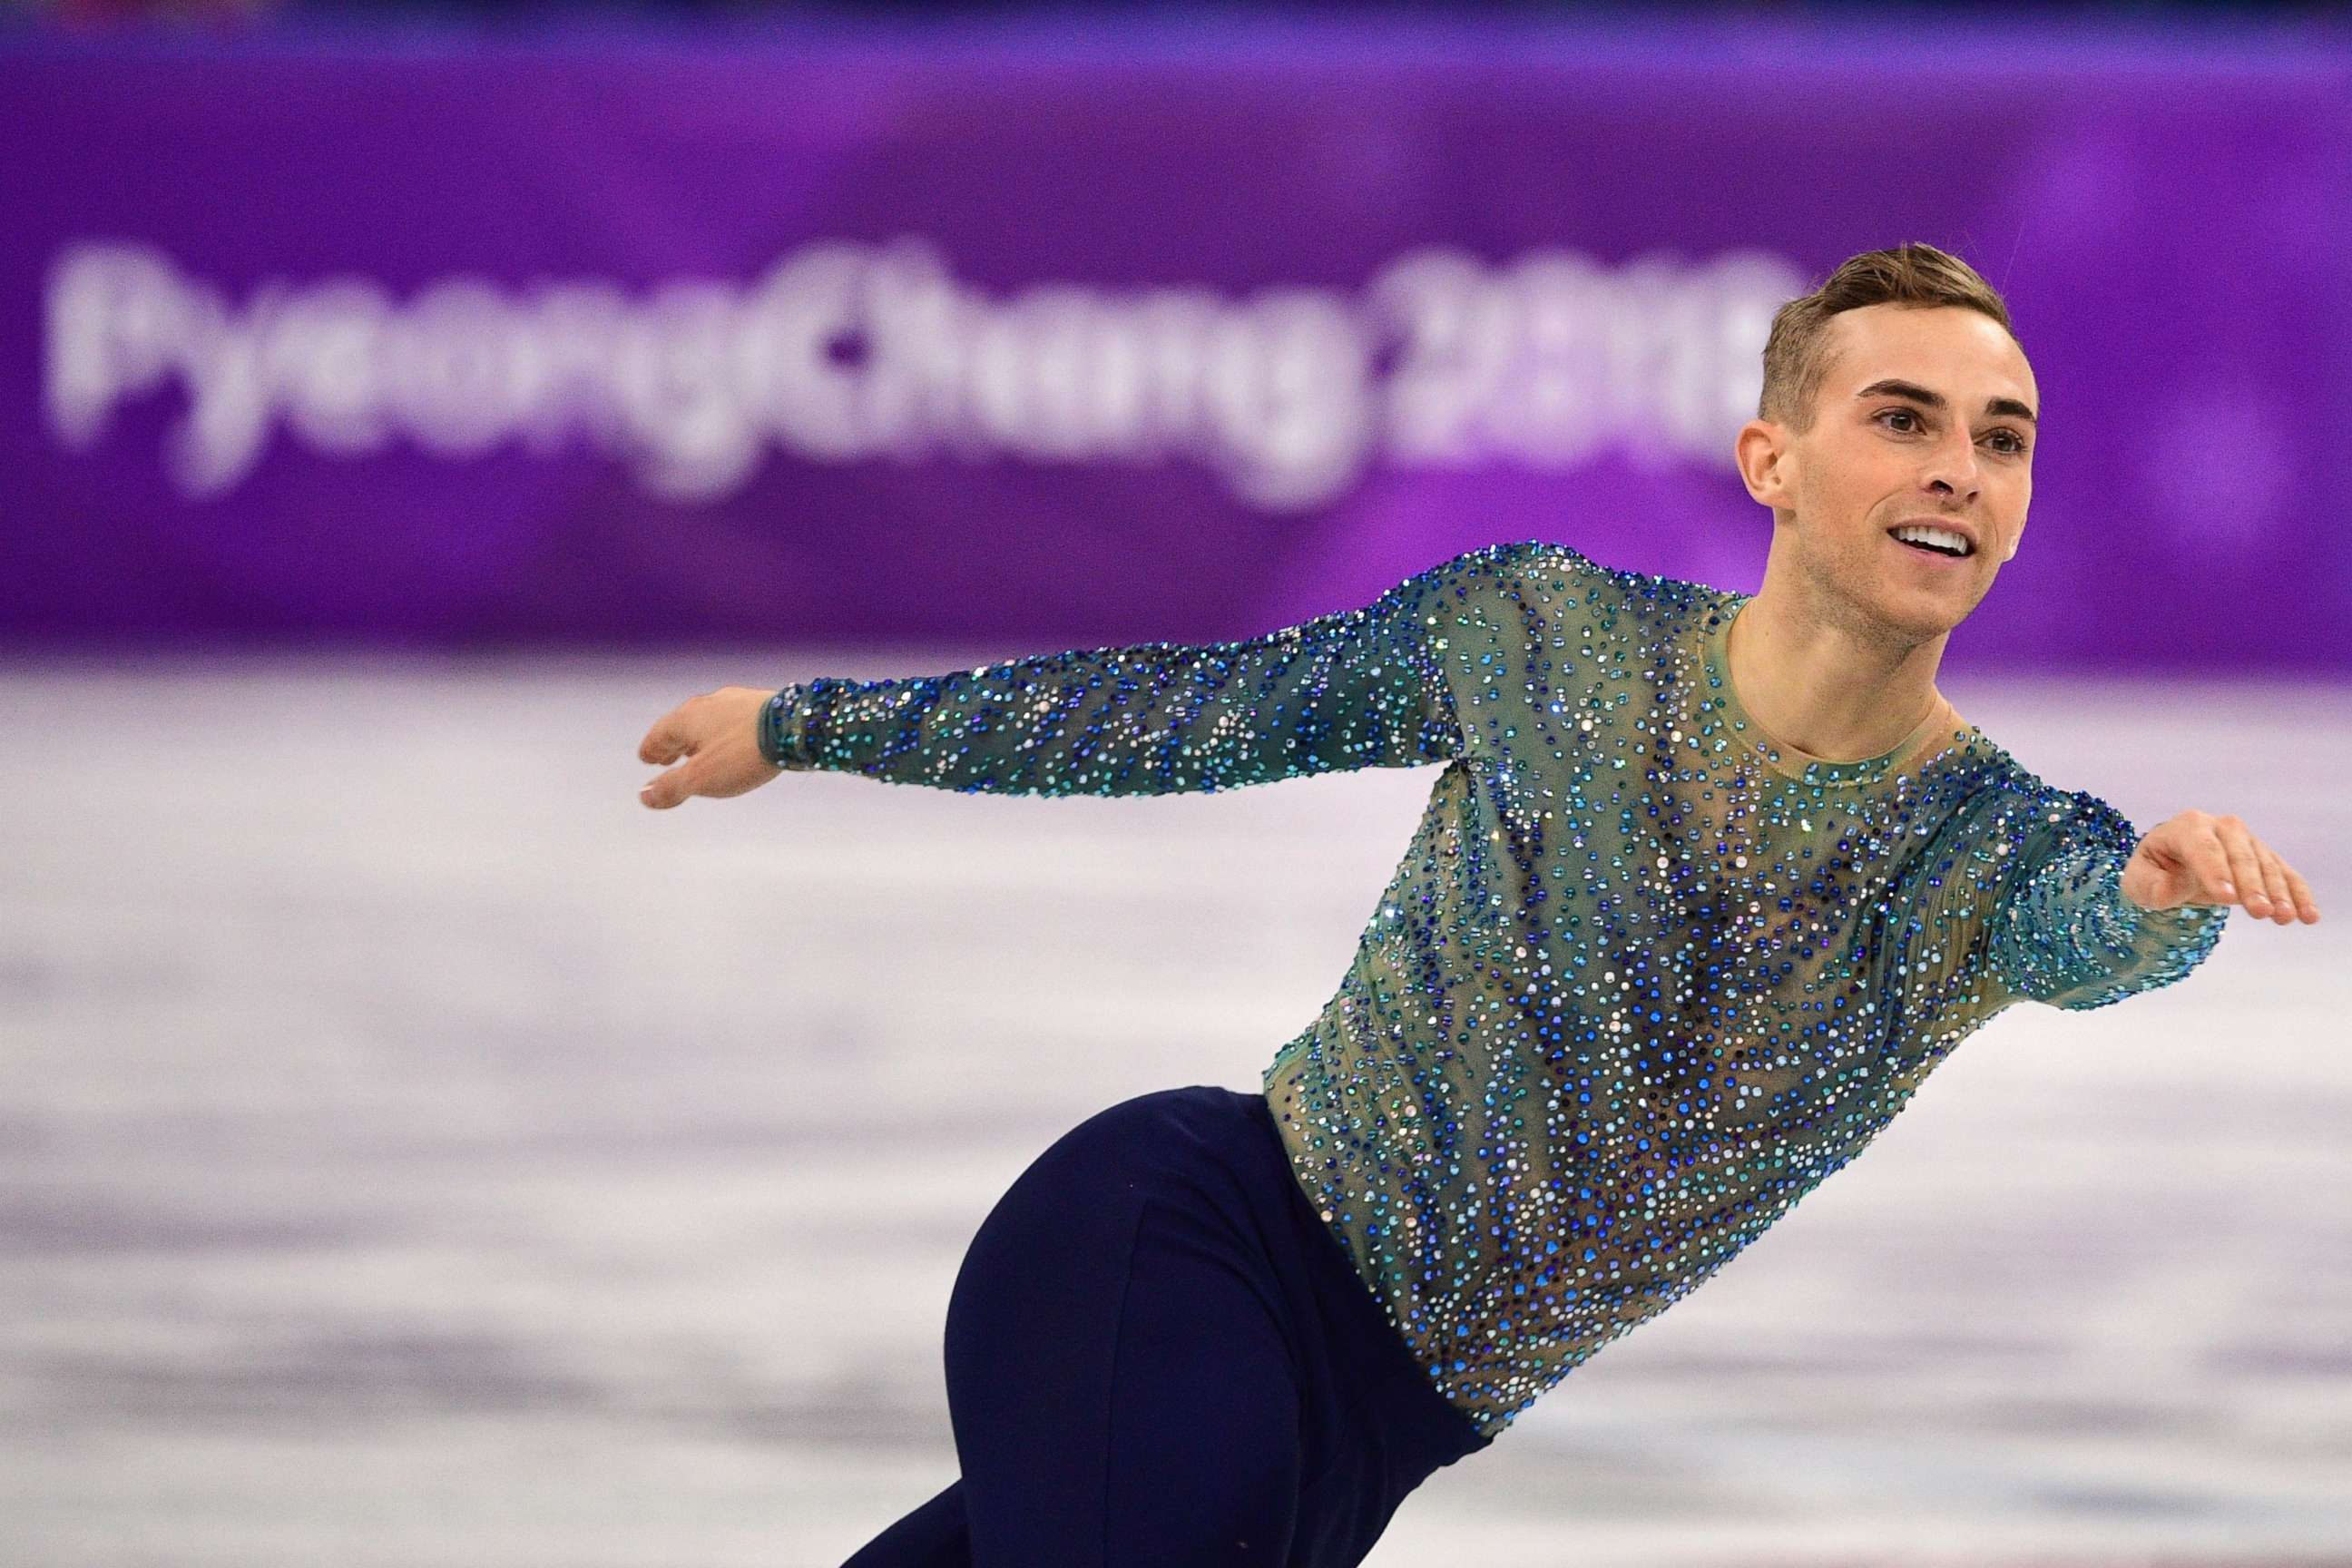 PHOTO: Adam Rippon competes in the men's single skating free skating of the figure skating event during the Pyeongchang 2018 Winter Olympic Games at the Gangneung Ice Arena in Gangneung, Feb. 17, 2018.